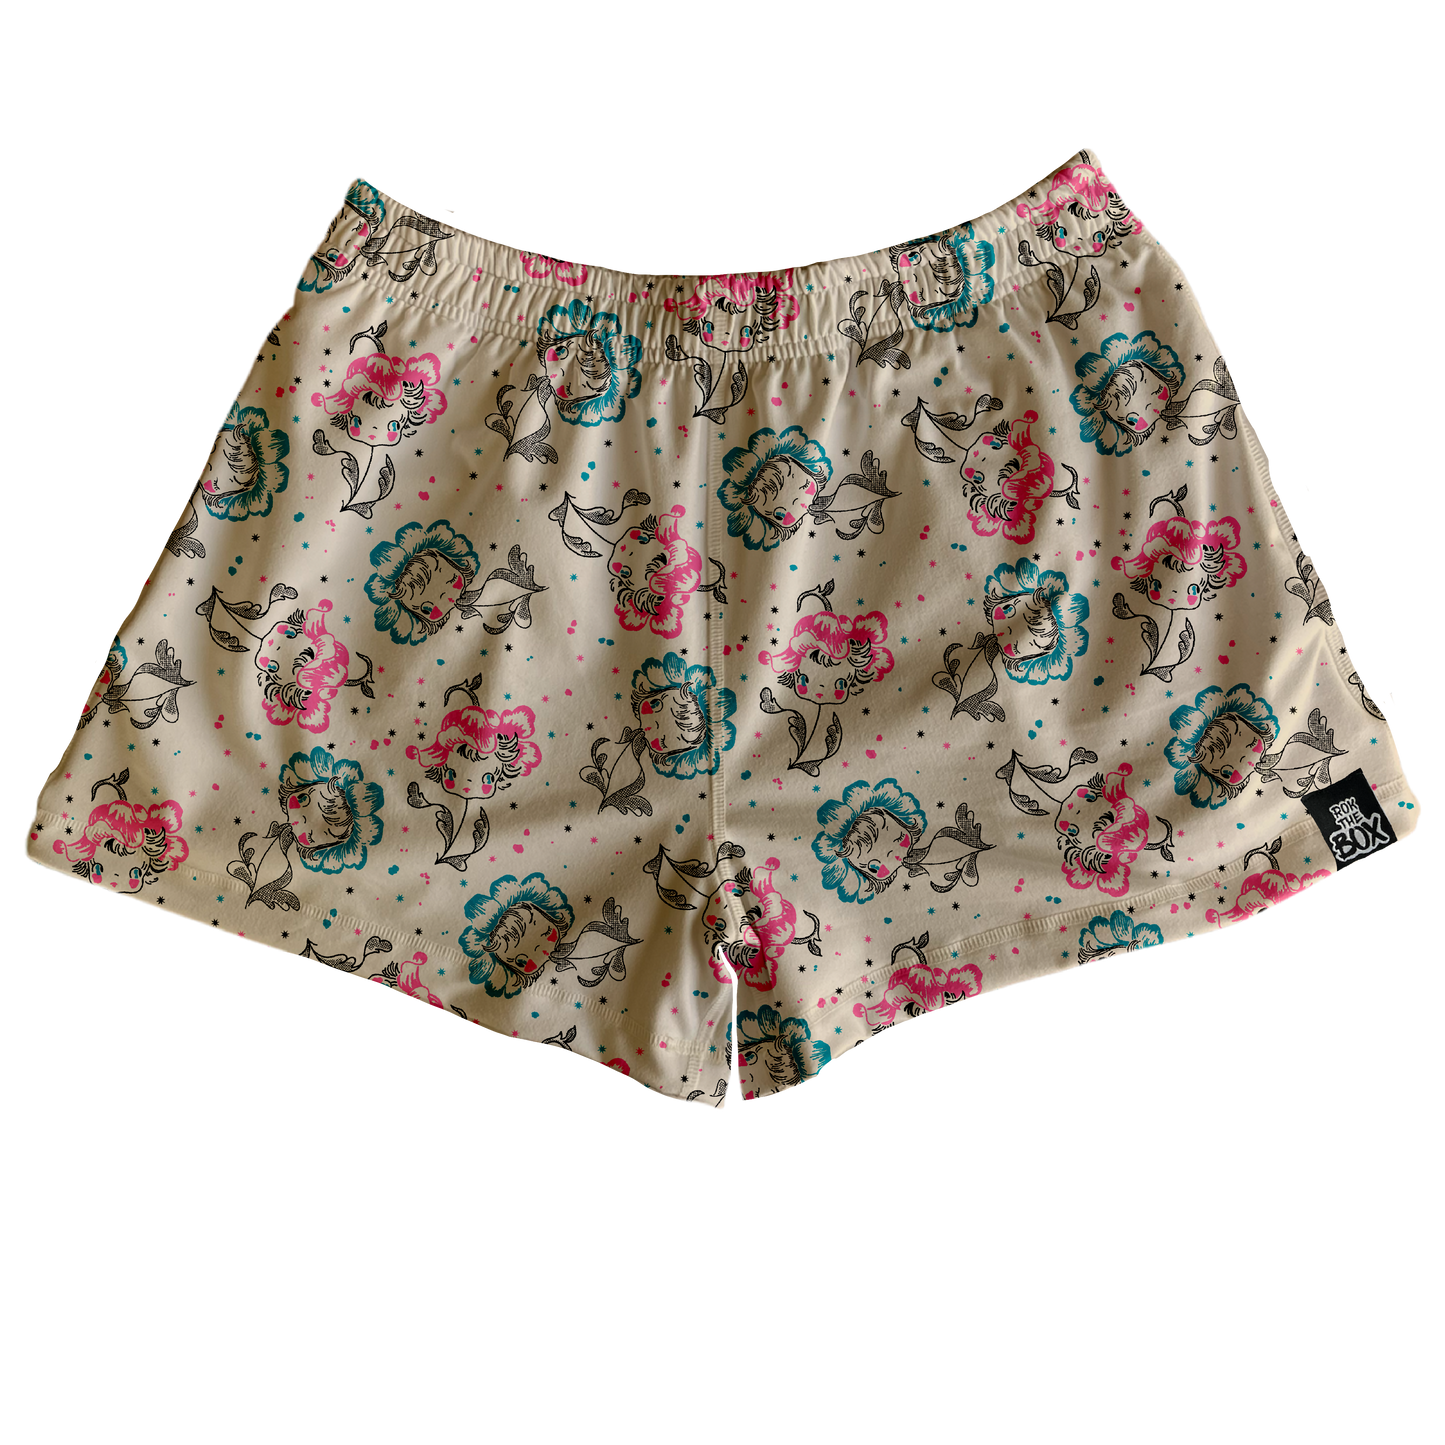 Dolly Daisies Lounge Short!